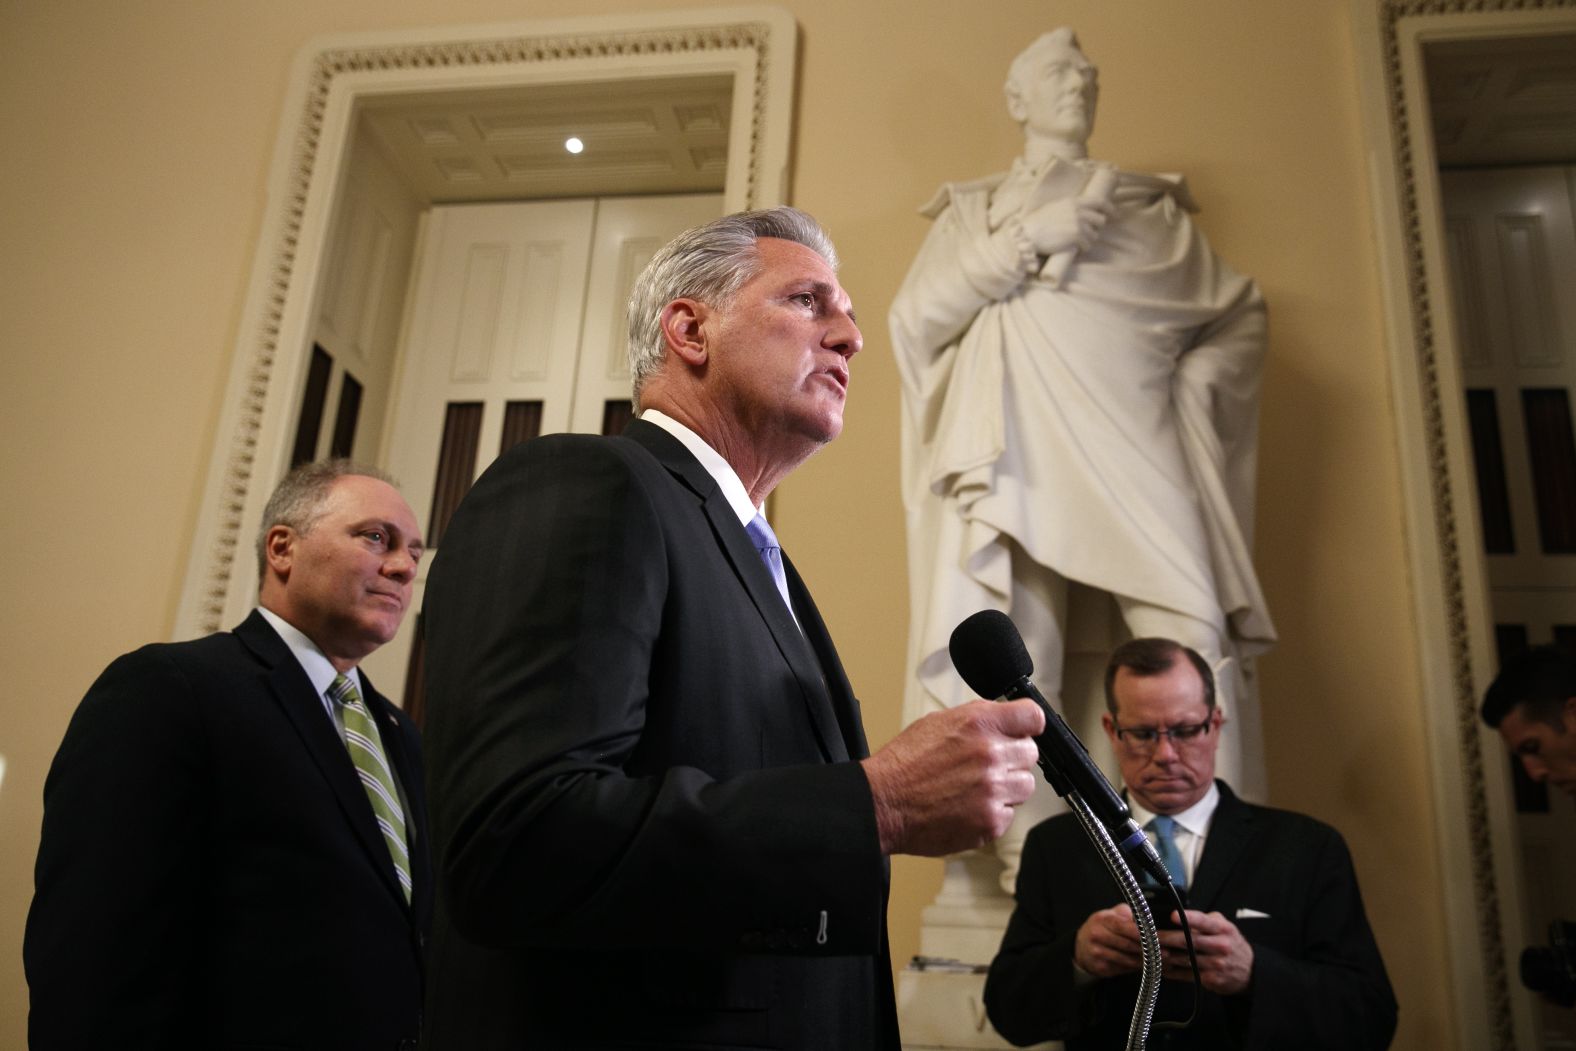 House Minority Leader Kevin McCarthy delivers <a href="index.php?page=&url=https%3A%2F%2Fwww.cnn.com%2F2019%2F09%2F24%2Fpolitics%2Ftrump-impeachment-response-video-democrats%2Findex.html" target="_blank">a GOP response</a> to Pelosi's announcement of an impeachment inquiry. McCarthy said Pelosi "does not speak for America when it comes to this issue."